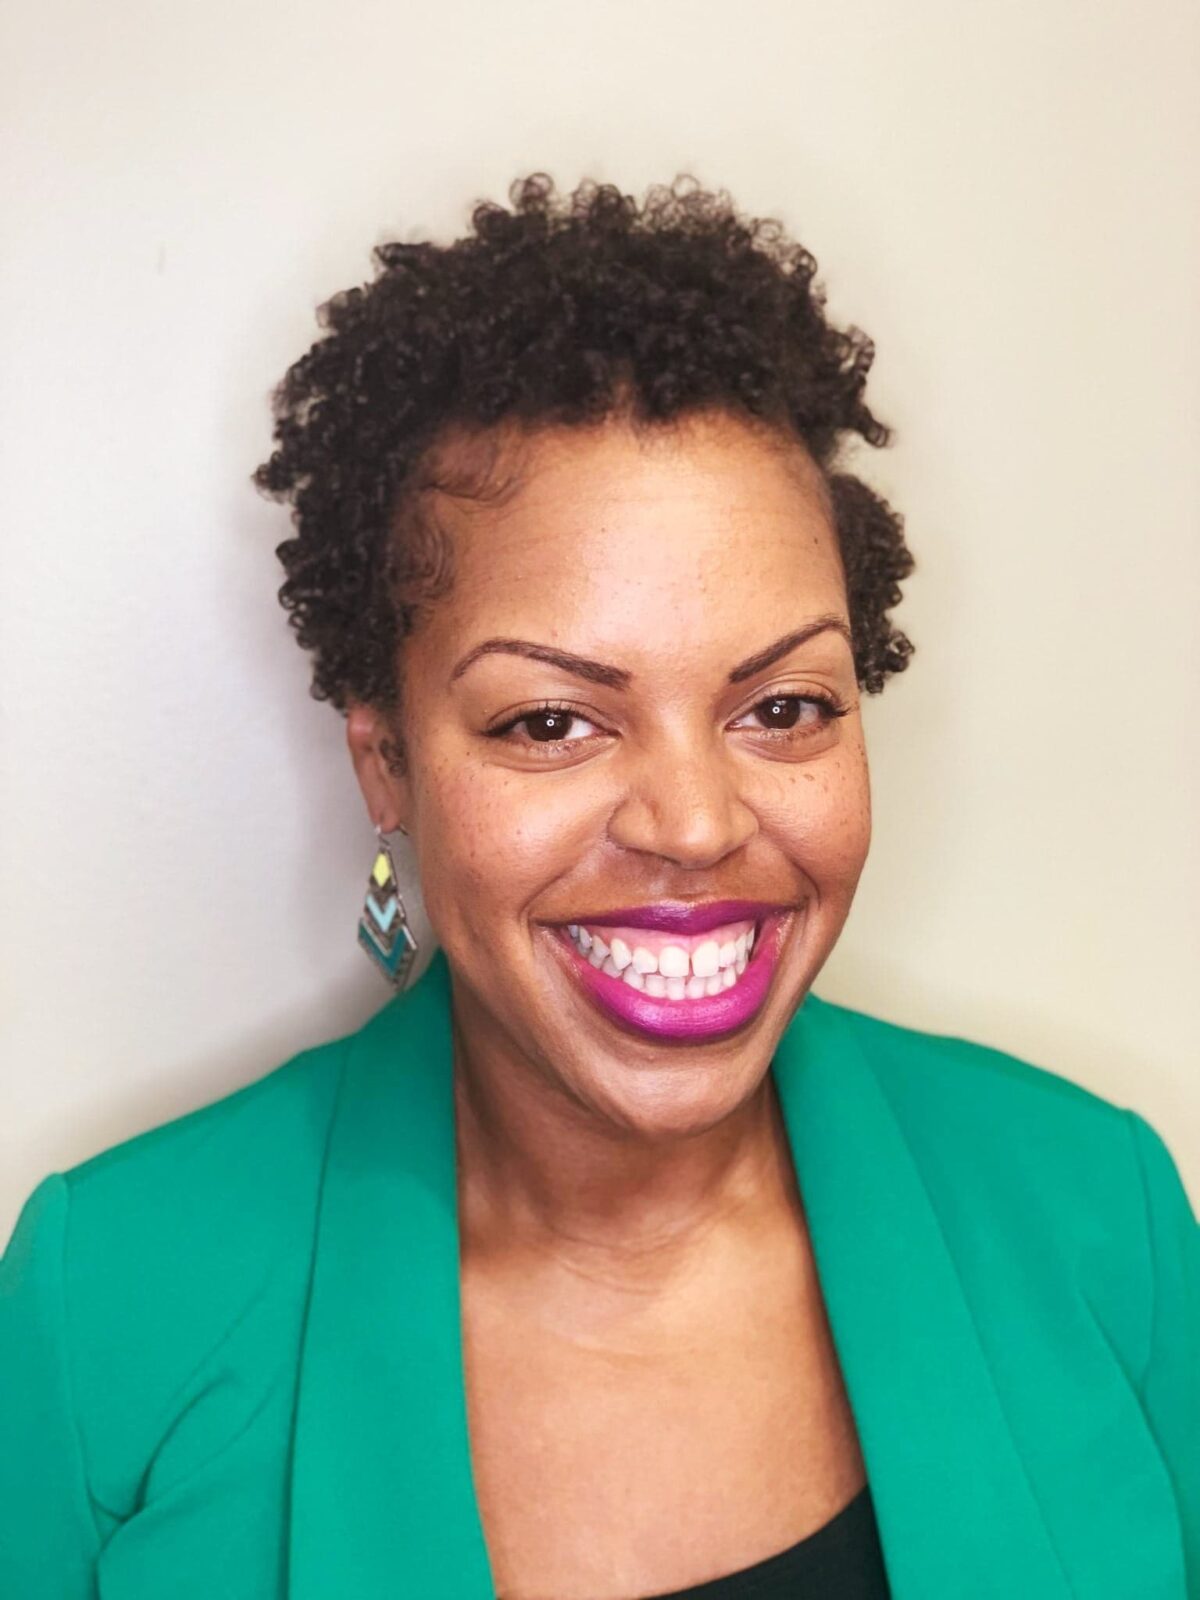 Black woman wearing a green suit jacket and black shirt.